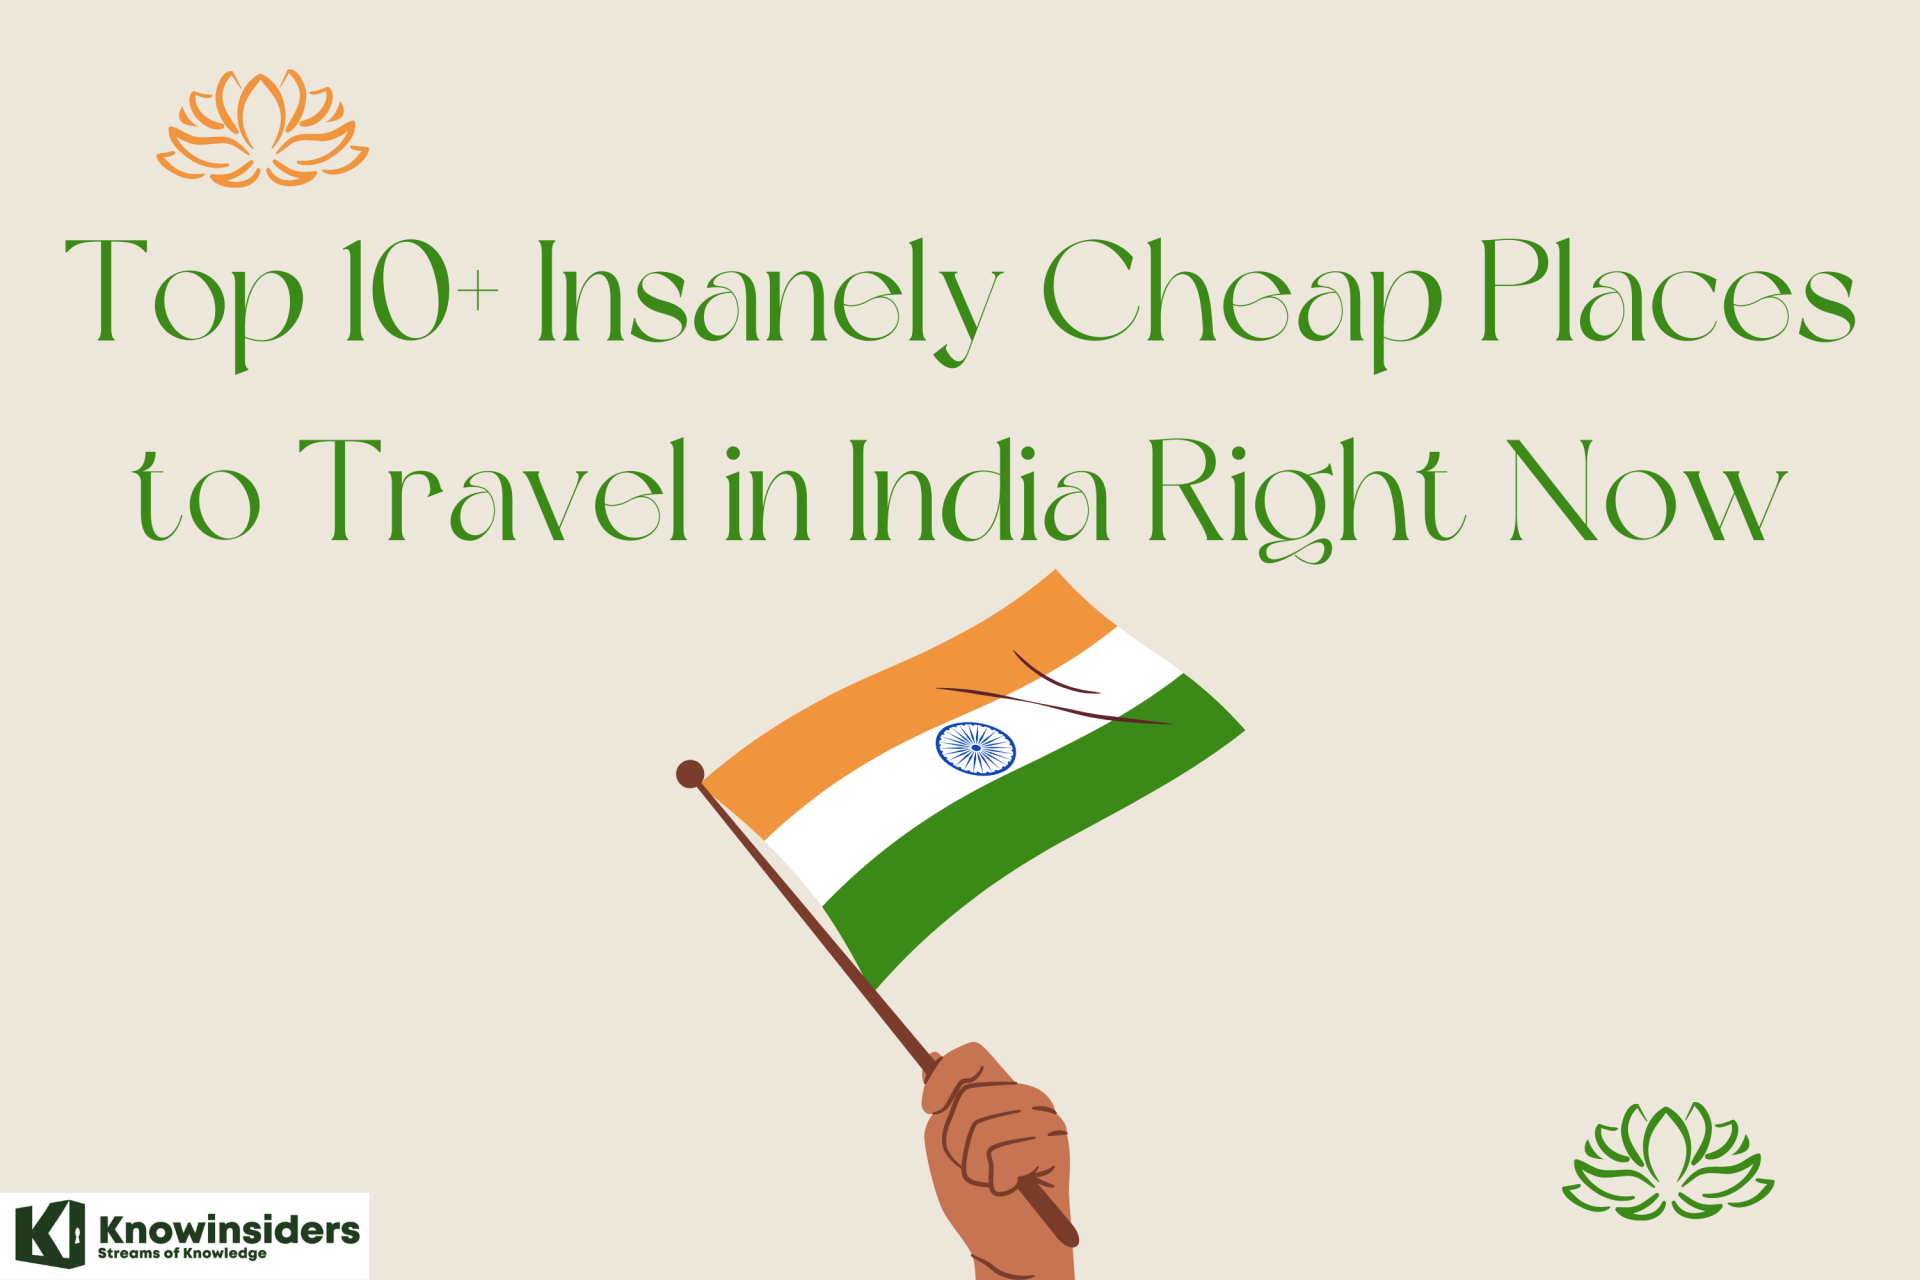 Top 10+ Insanely Cheap Places to Travel in India Right Now